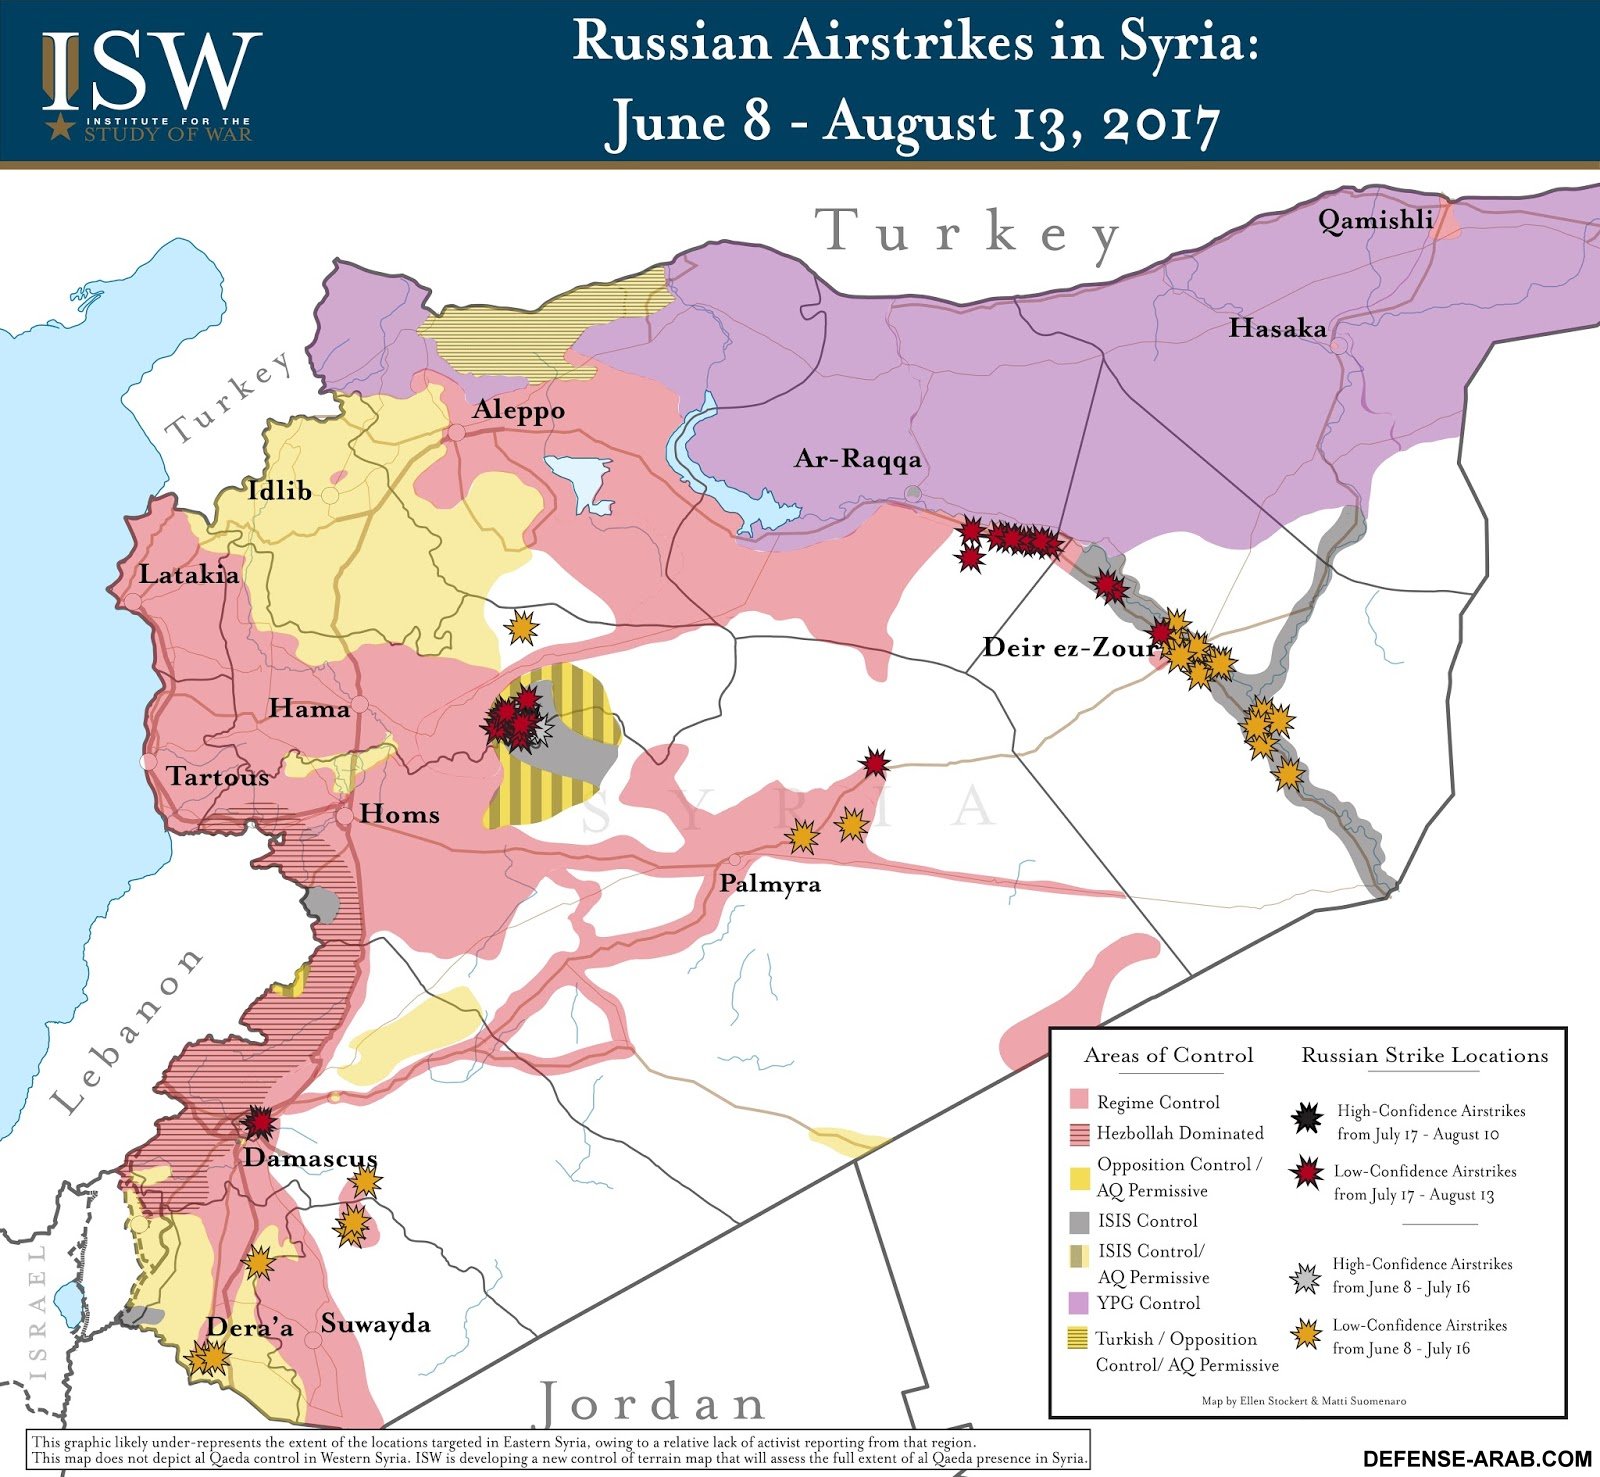 Russian Airstrikes in Syria July 17 - August 13 (1)-01.jpg